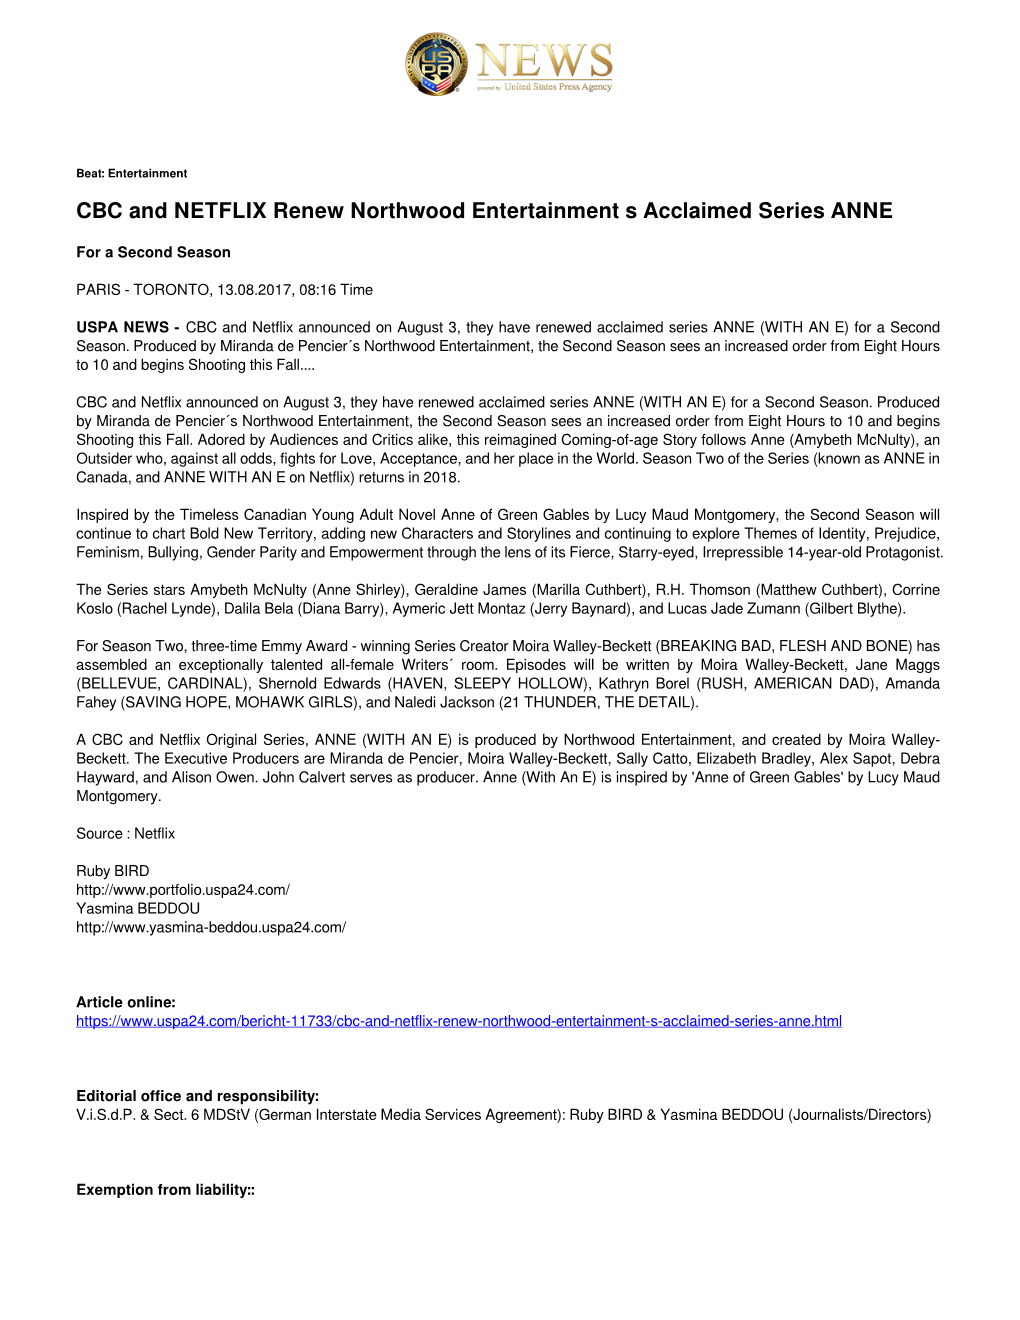 CBC and NETFLIX Renew Northwood Entertainment S Acclaimed Series ANNE